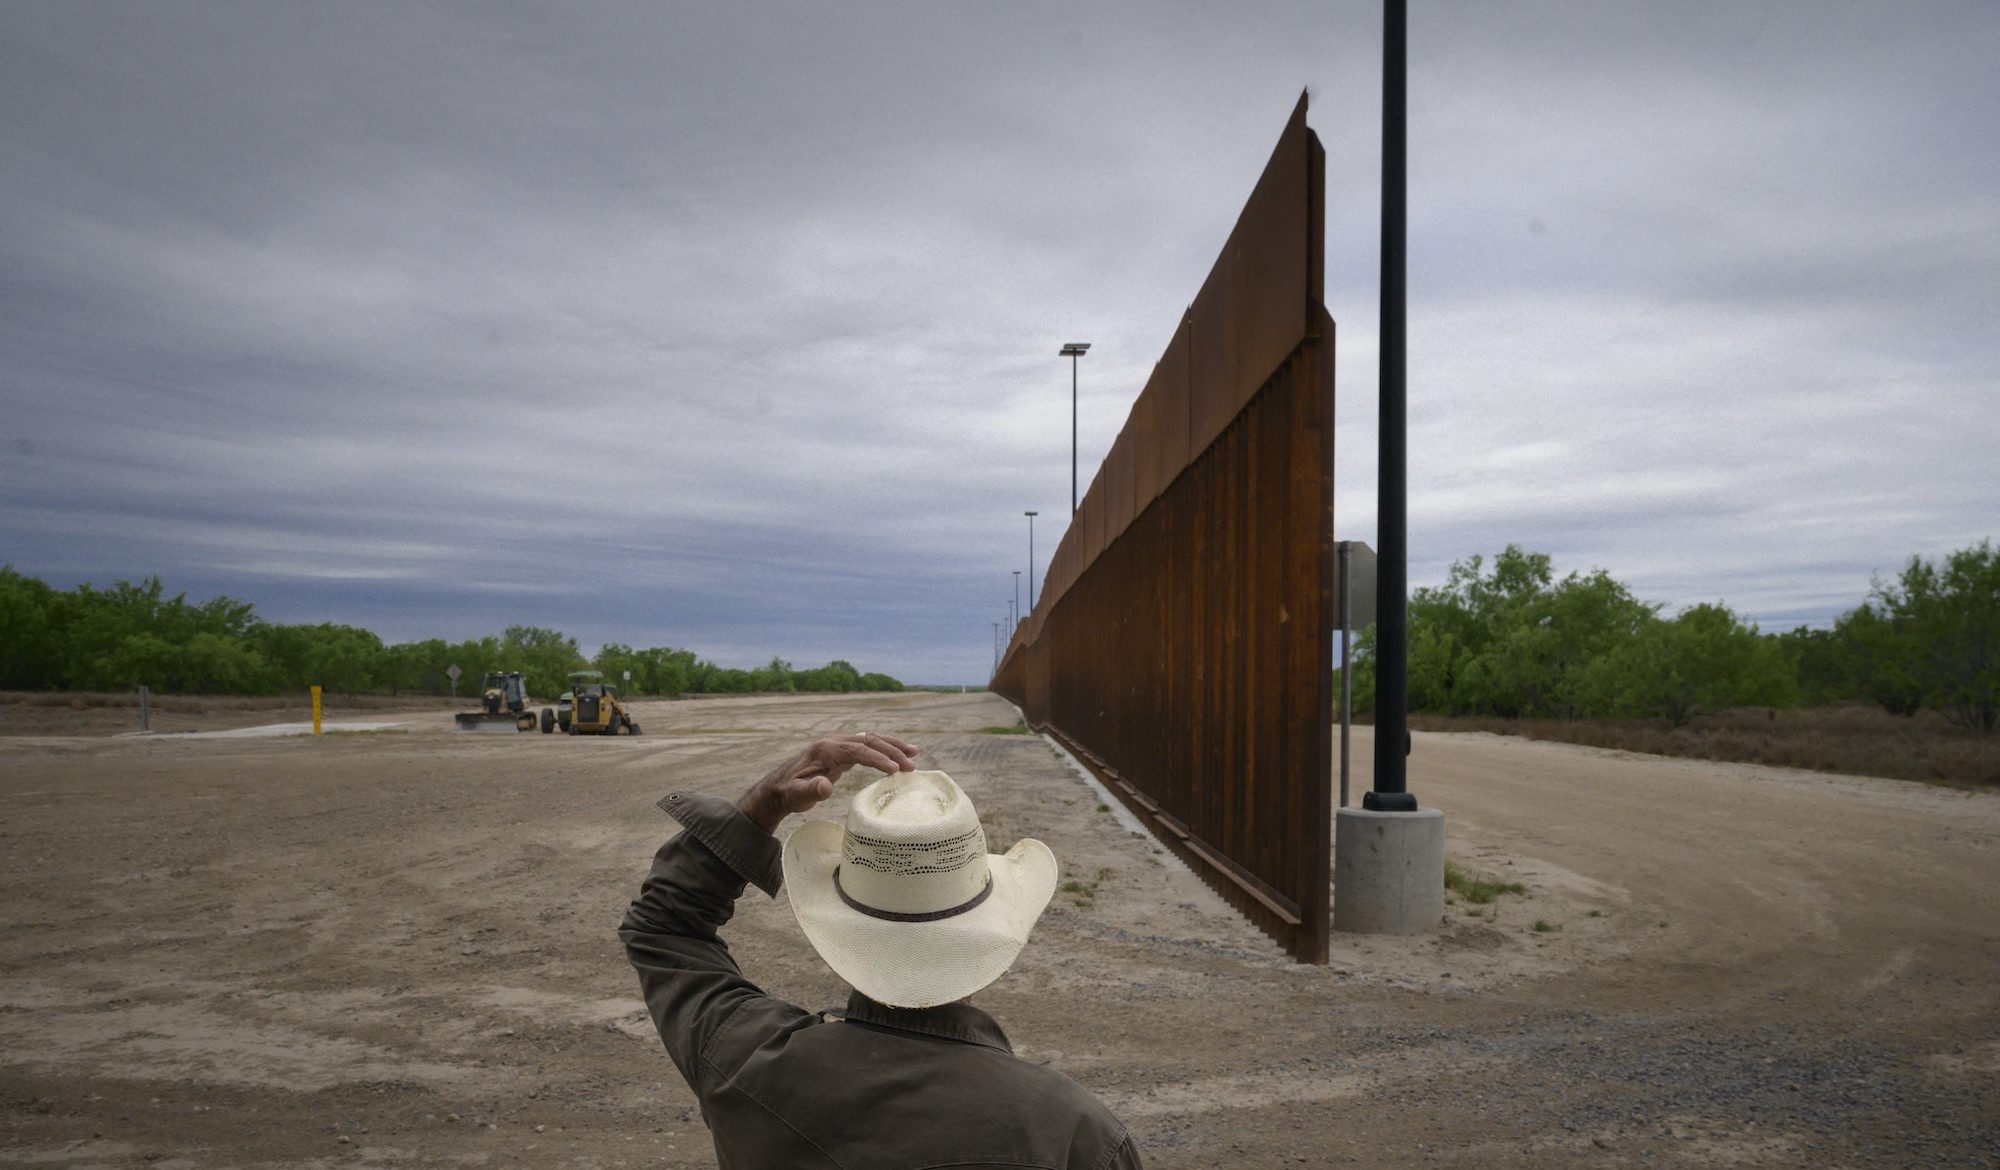 In a photo taken on March 28, 2021 ranch owner Tony Sandoval (67) stands before a portion of the unfinished border wall that former US president Donald Trump tried to build, near the southern Texas border city of Roma. August 2021